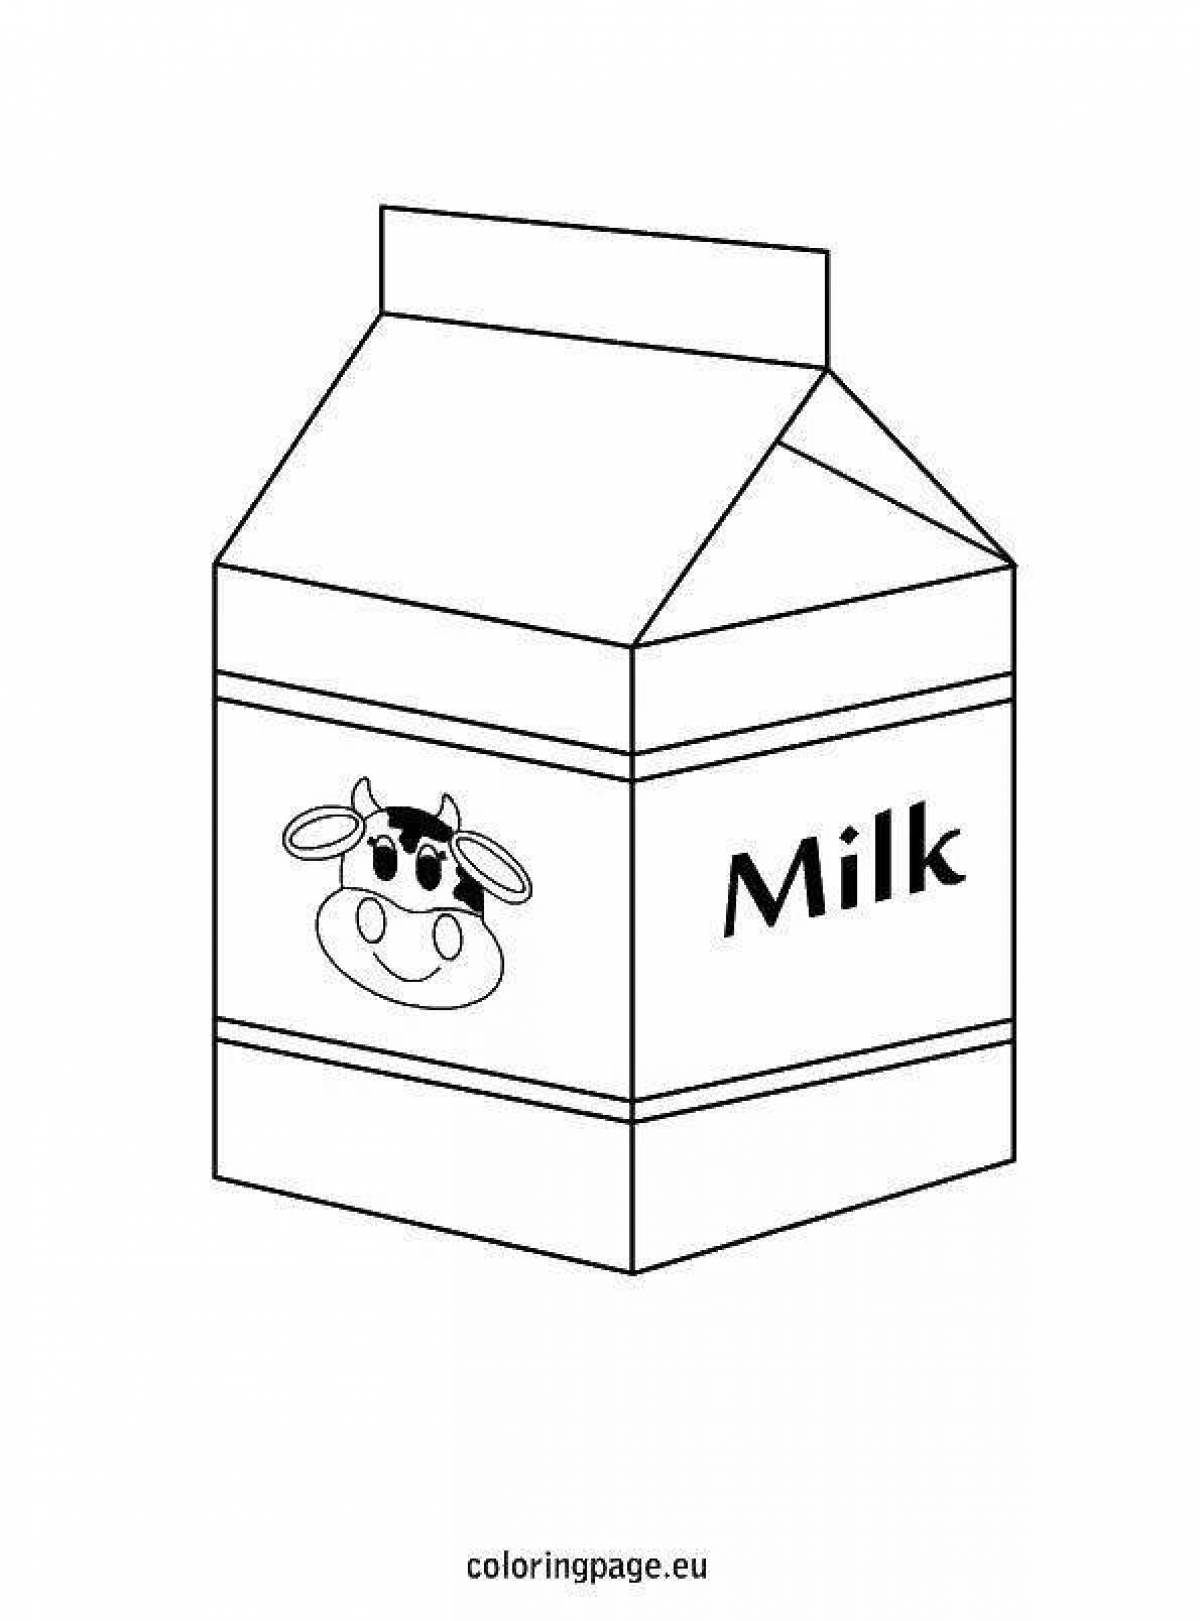 Glowing milk coloring page